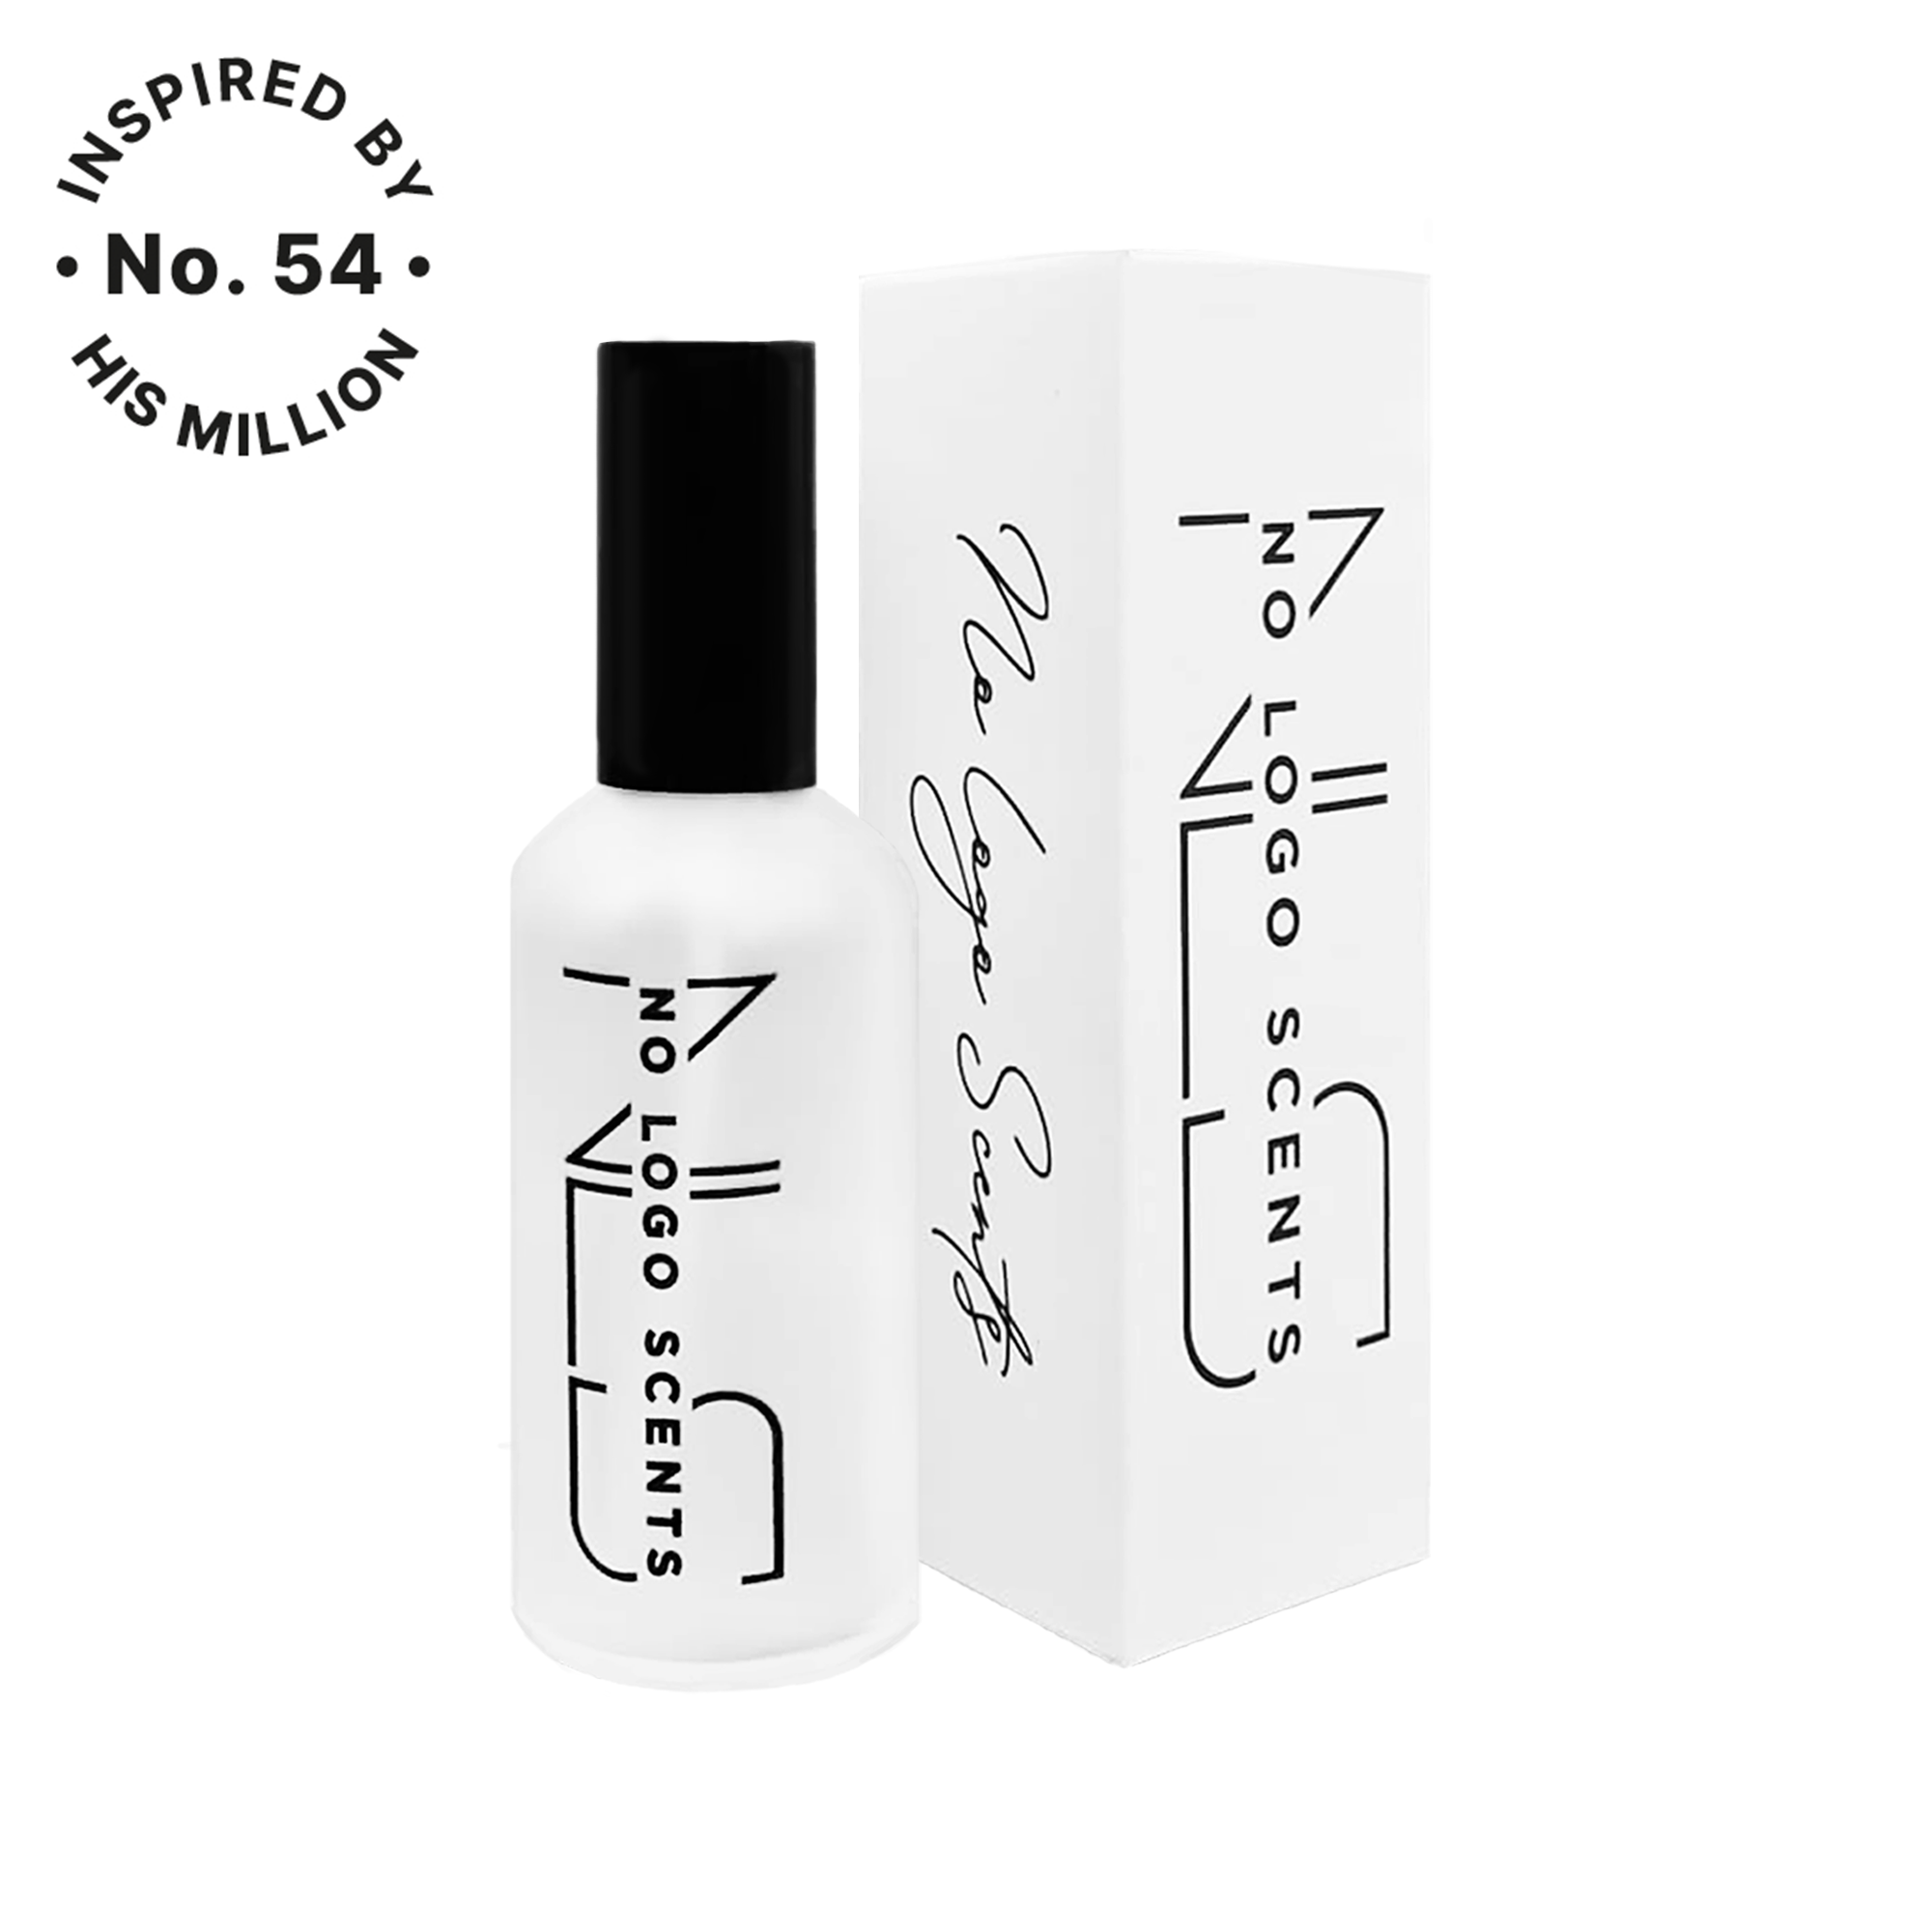 No.54 – INSPIRED BY HIS MILLION from category MEN’S AFTERSHAVES - 1